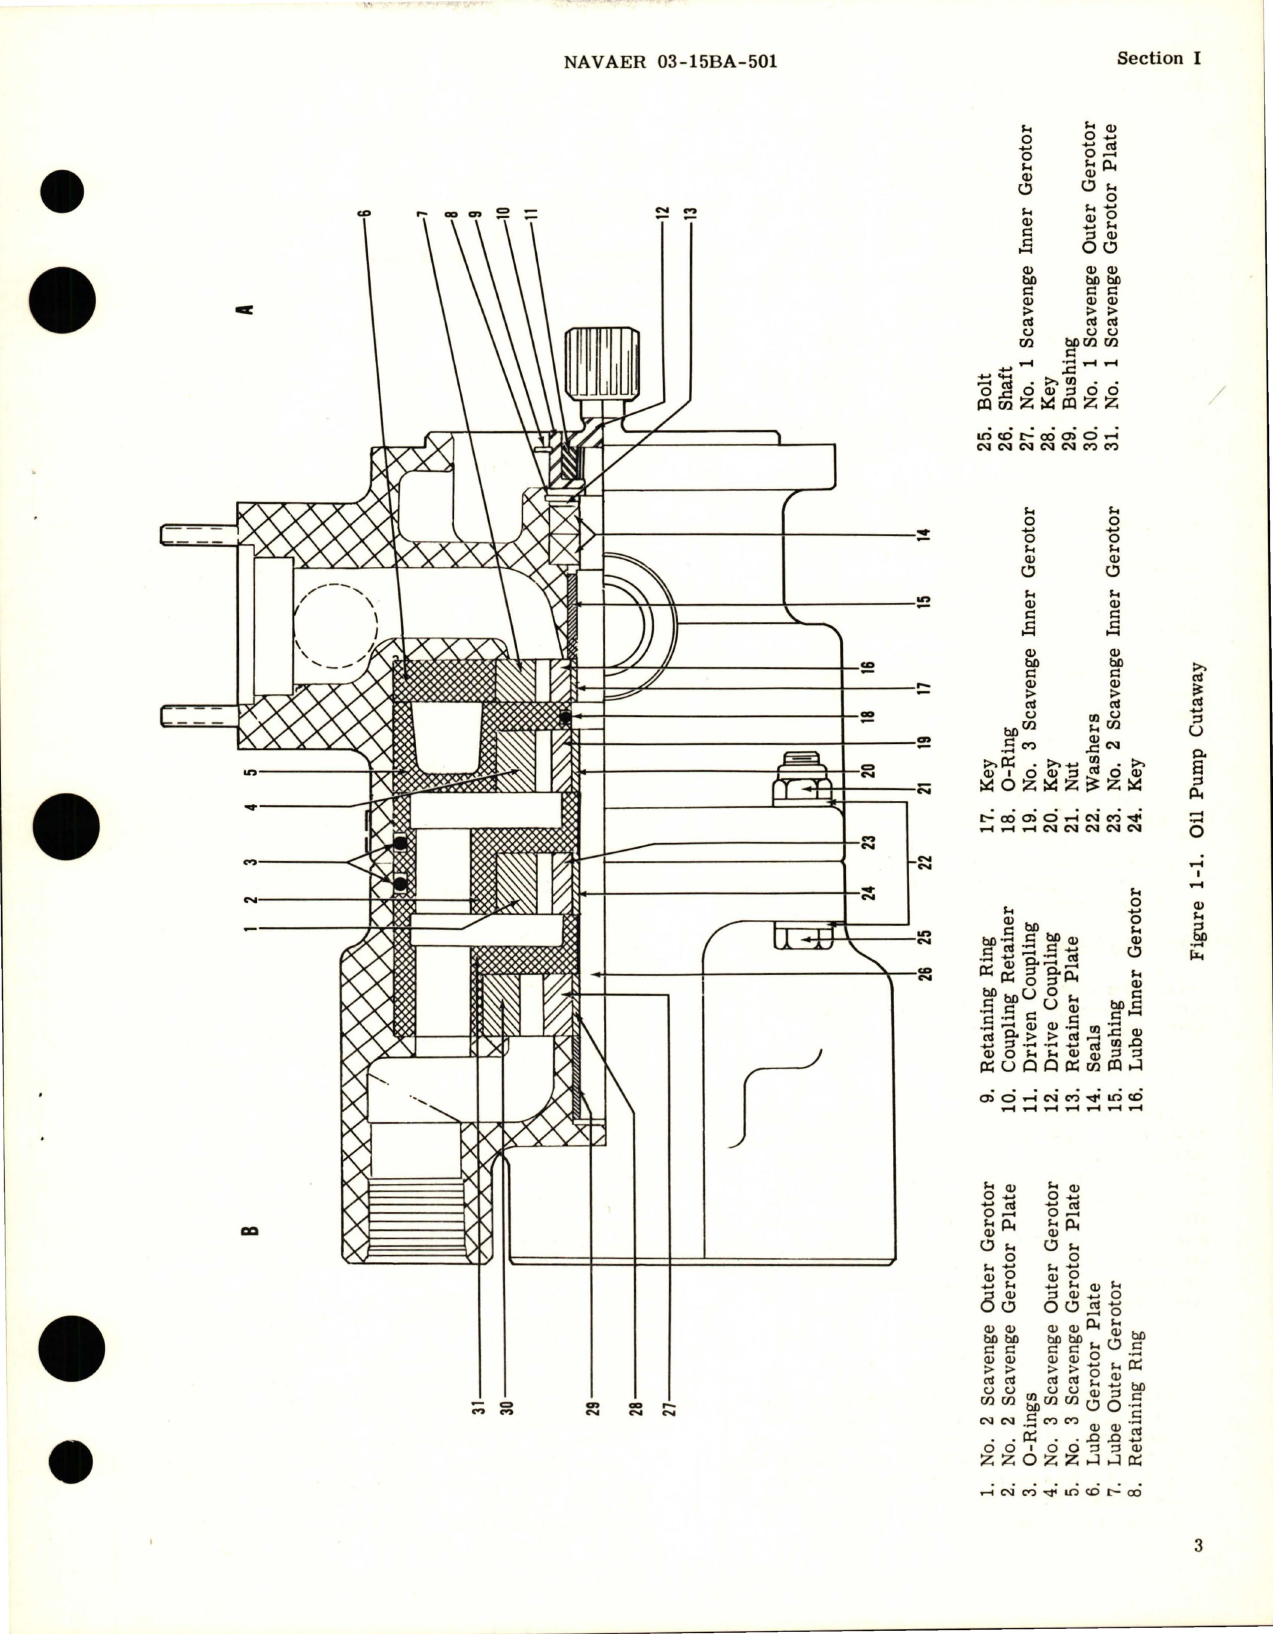 Sample page 5 from AirCorps Library document: Overhaul Instructions with Illustrated Parts Breakdown for Oil Pump - Models GD-31-2 and GD-31-4